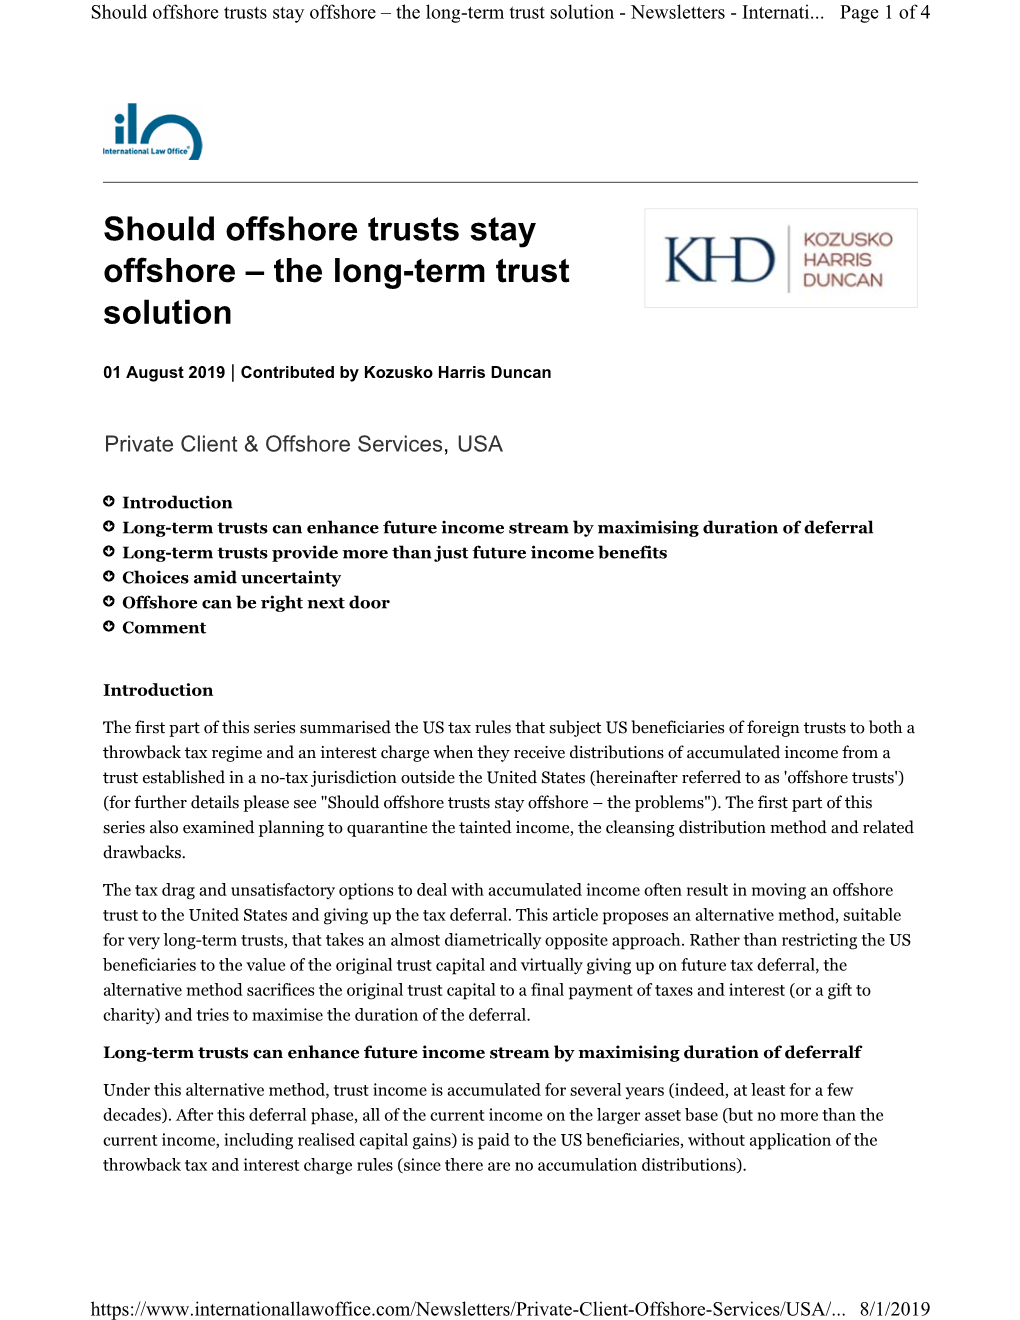 Should Offshore Trusts Stay Offshore – the Long-Term Trust Solution - Newsletters - Internati